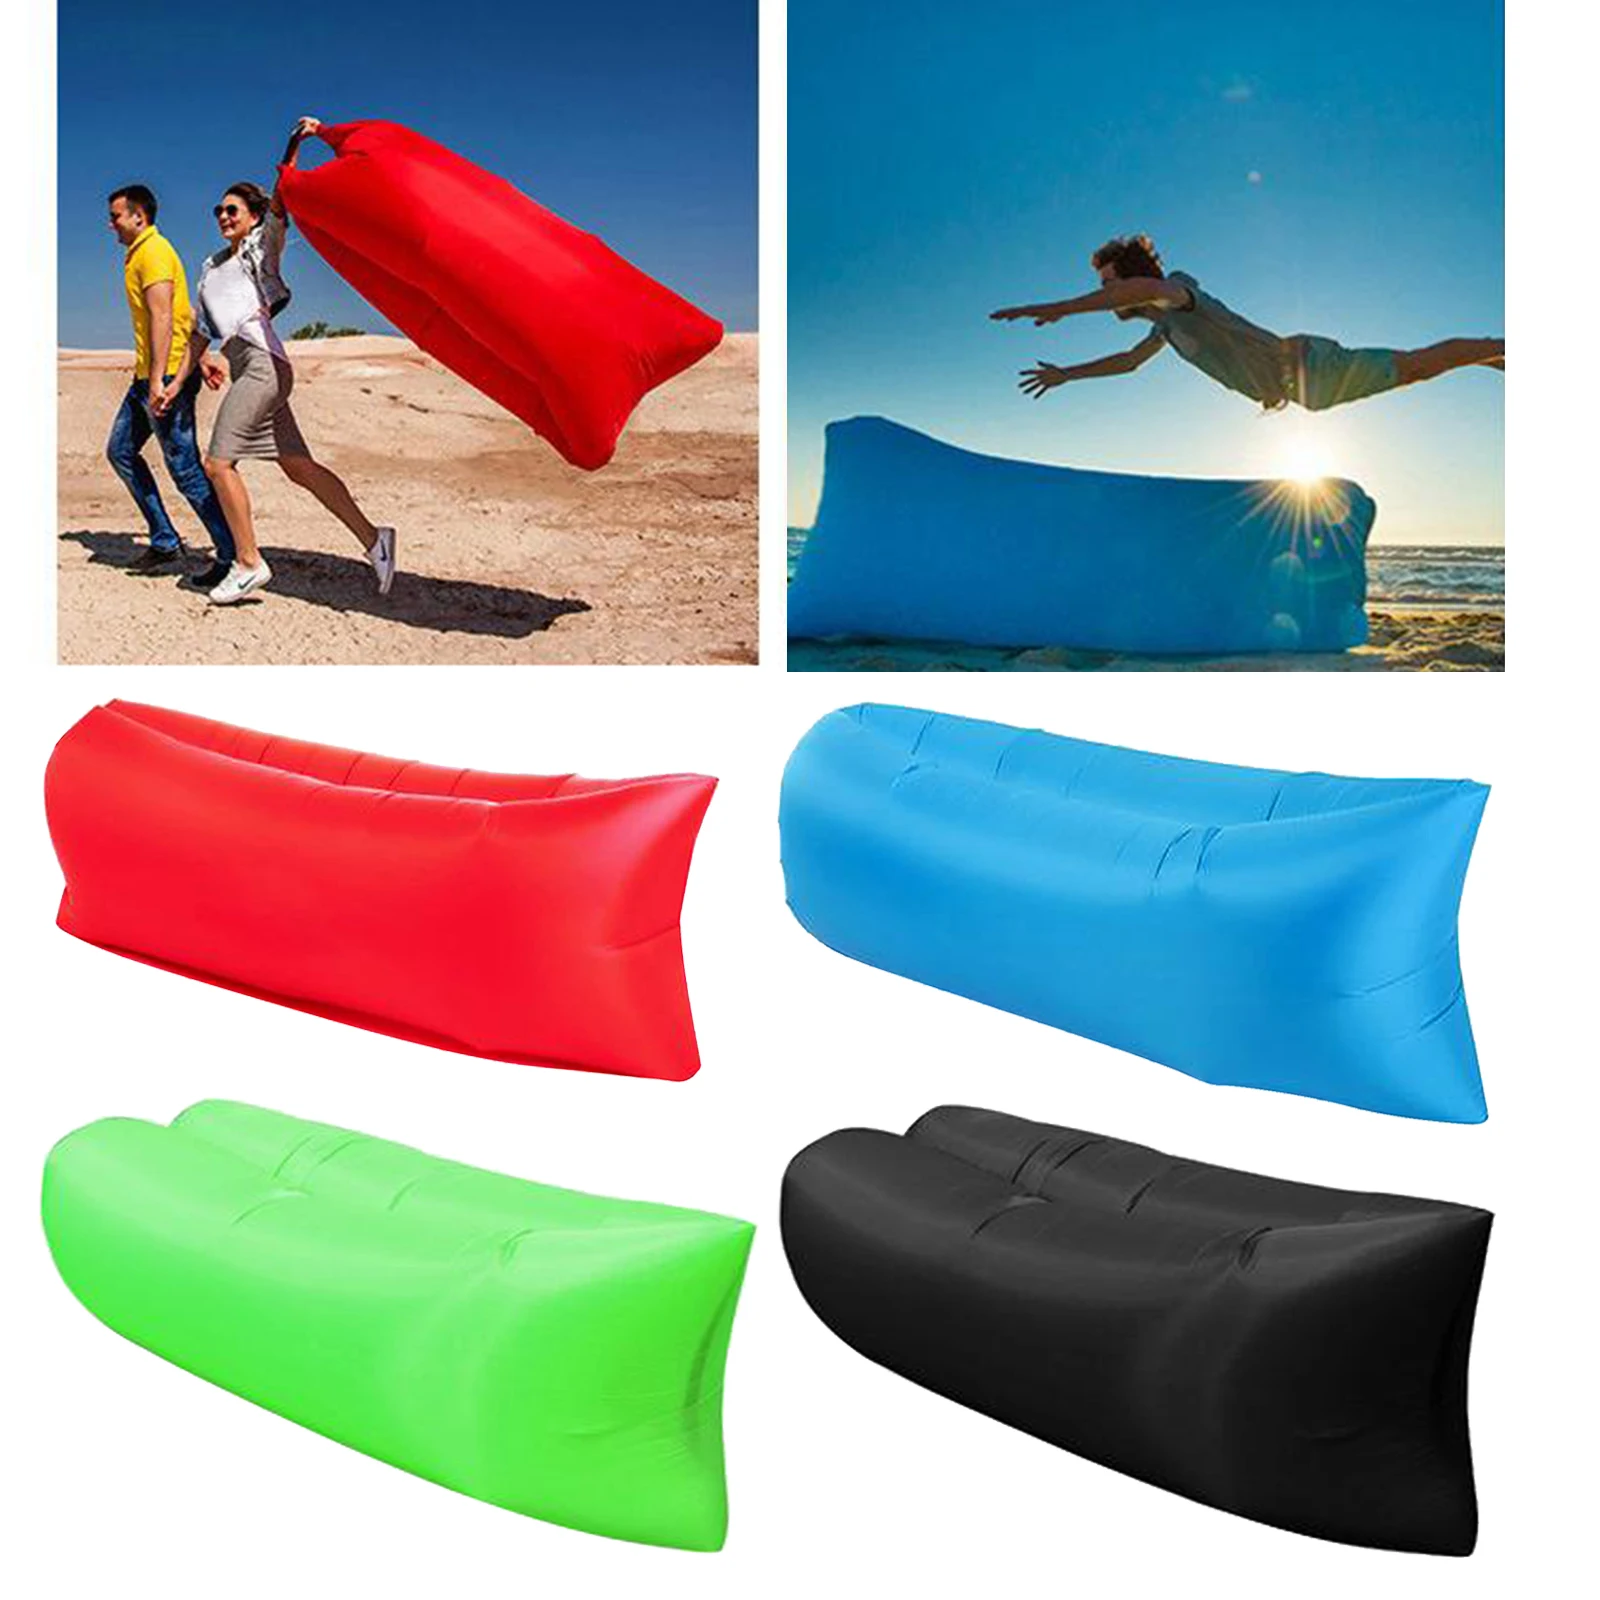 Inflatable Air Sofa Outdoor Couch Portable Furniture Sleeping Hangout Lounger Summer Camping Beach Relax Bed Air Mattresses 